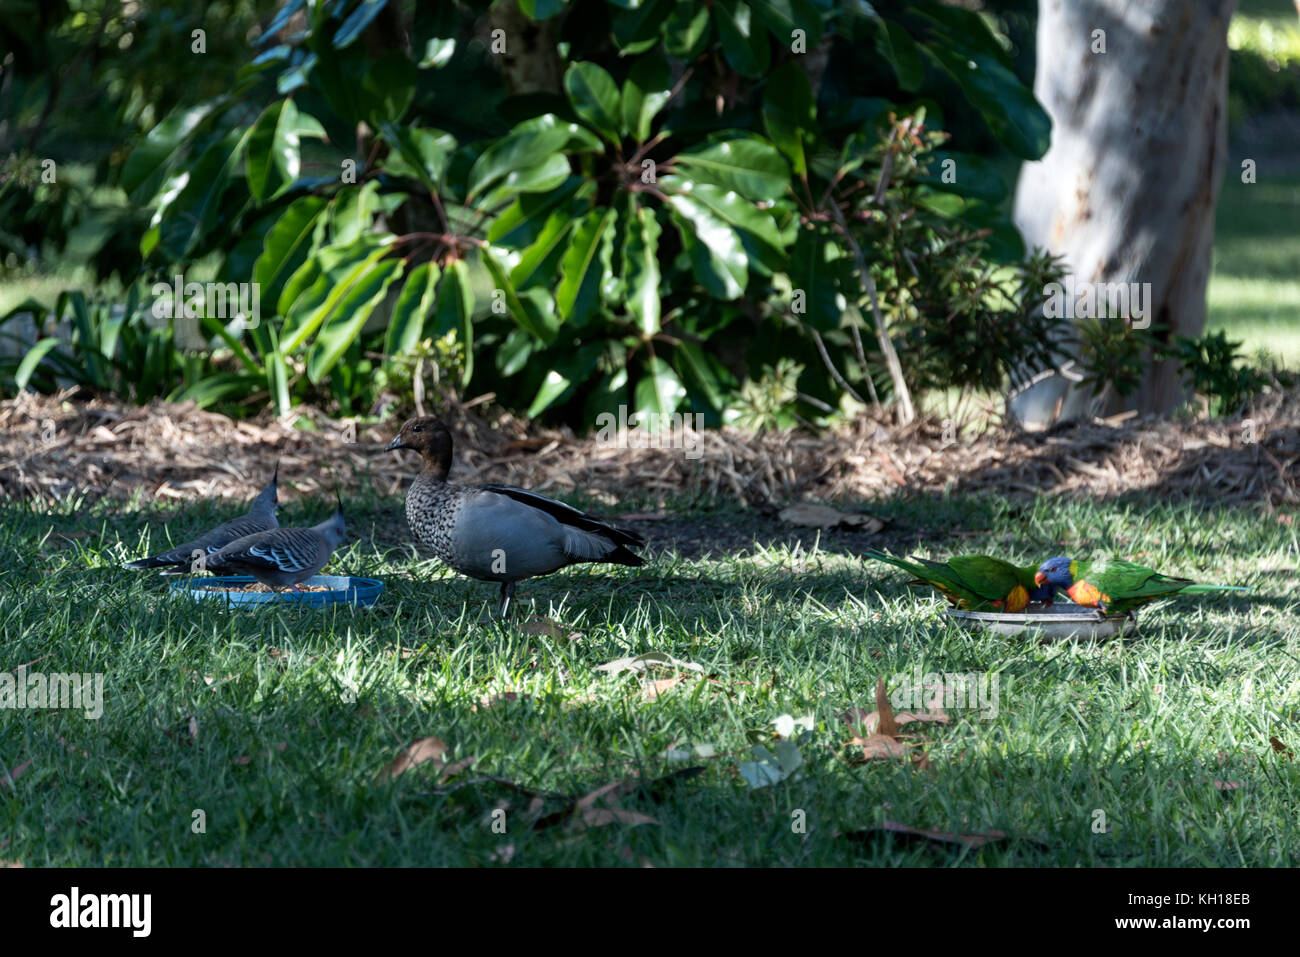 A wood duck with a pair of Crested pigeons and Rainbow Lorikeets feeding in a residential garden in Queensland, Australia Stock Photo